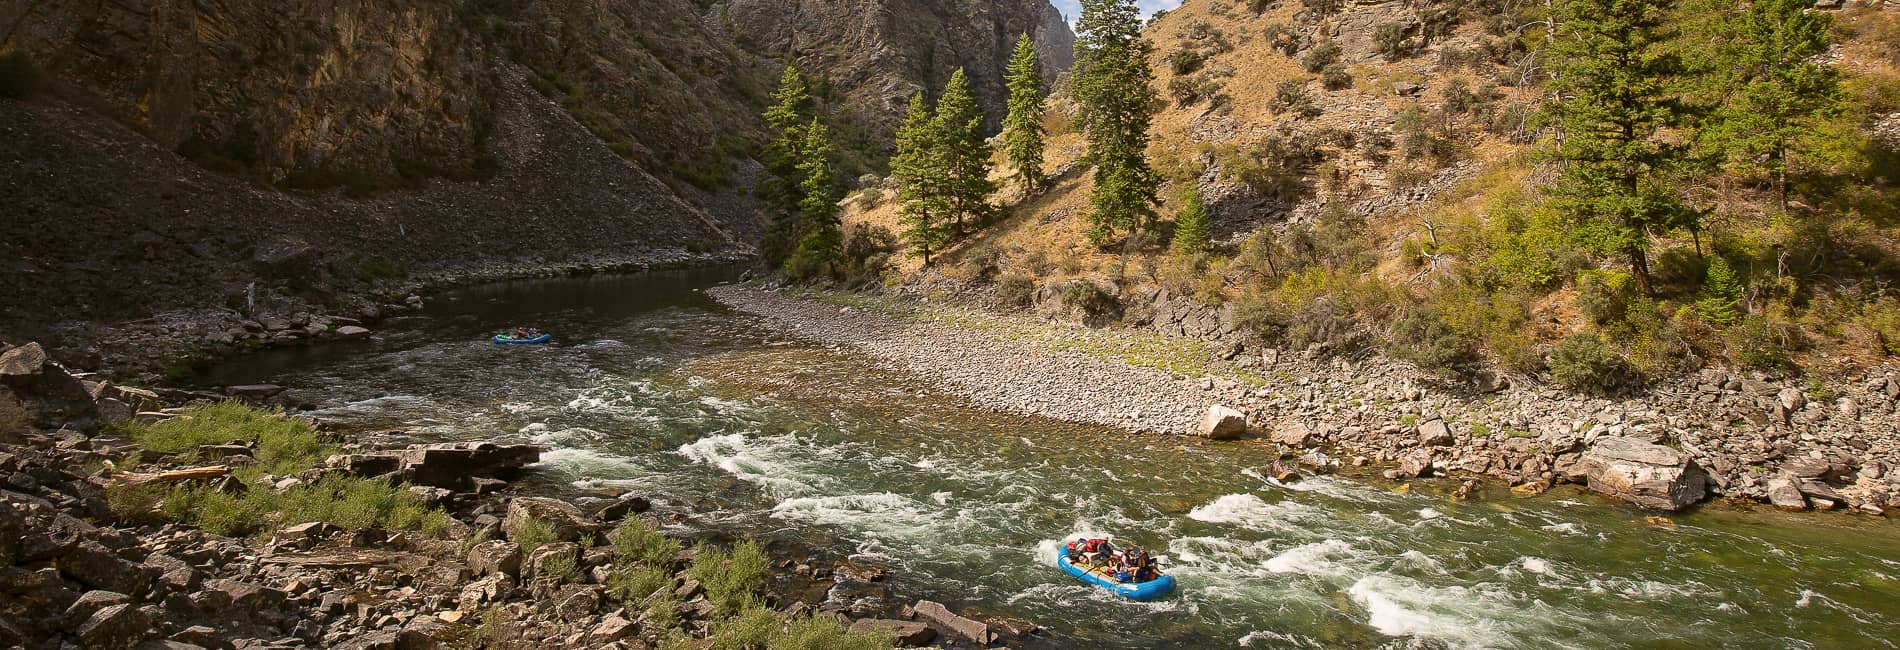 Rafting on the Middle Fork of the Salmon River in Idaho